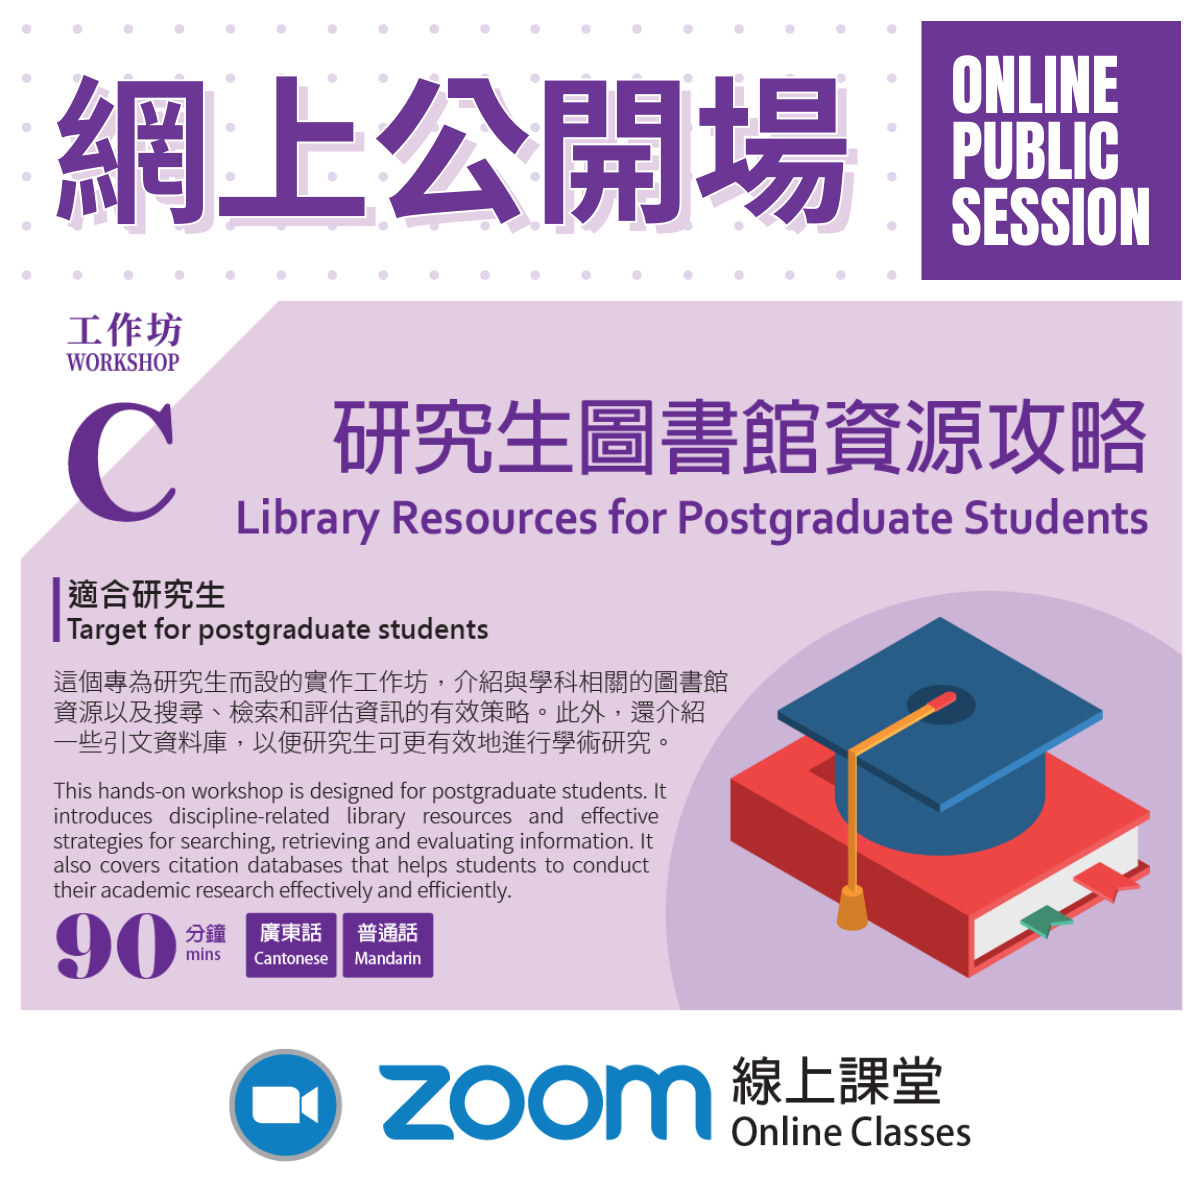 LIBRARY WORKSHOP C - Library Resources for Postgraduate Students (Online Public Session)